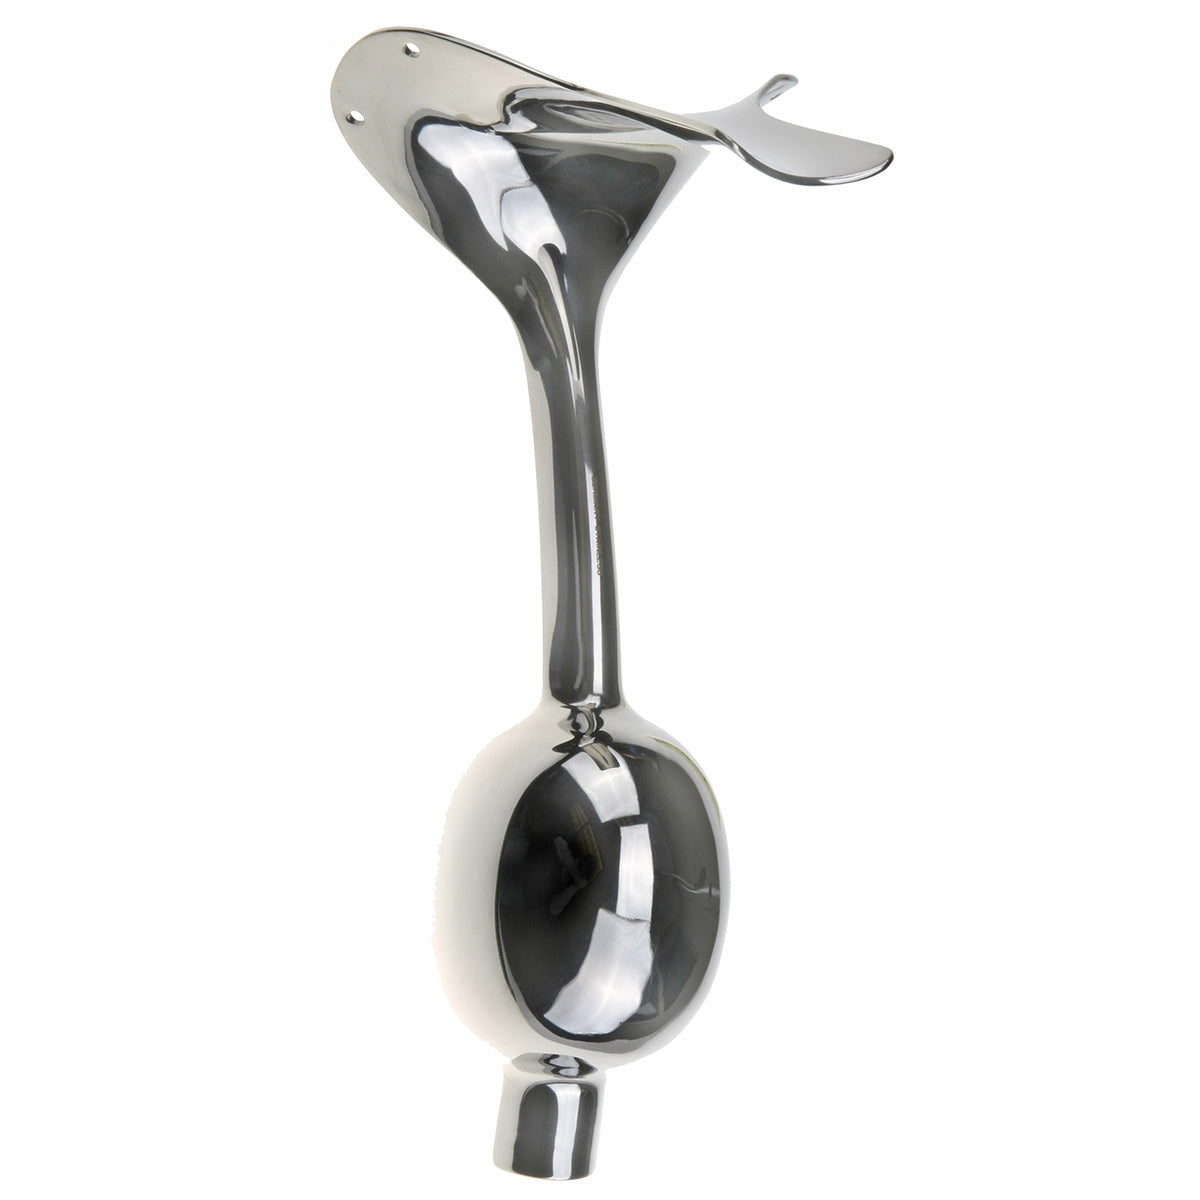 2 1/2 lbs. fixed weight Auvard Speculum 